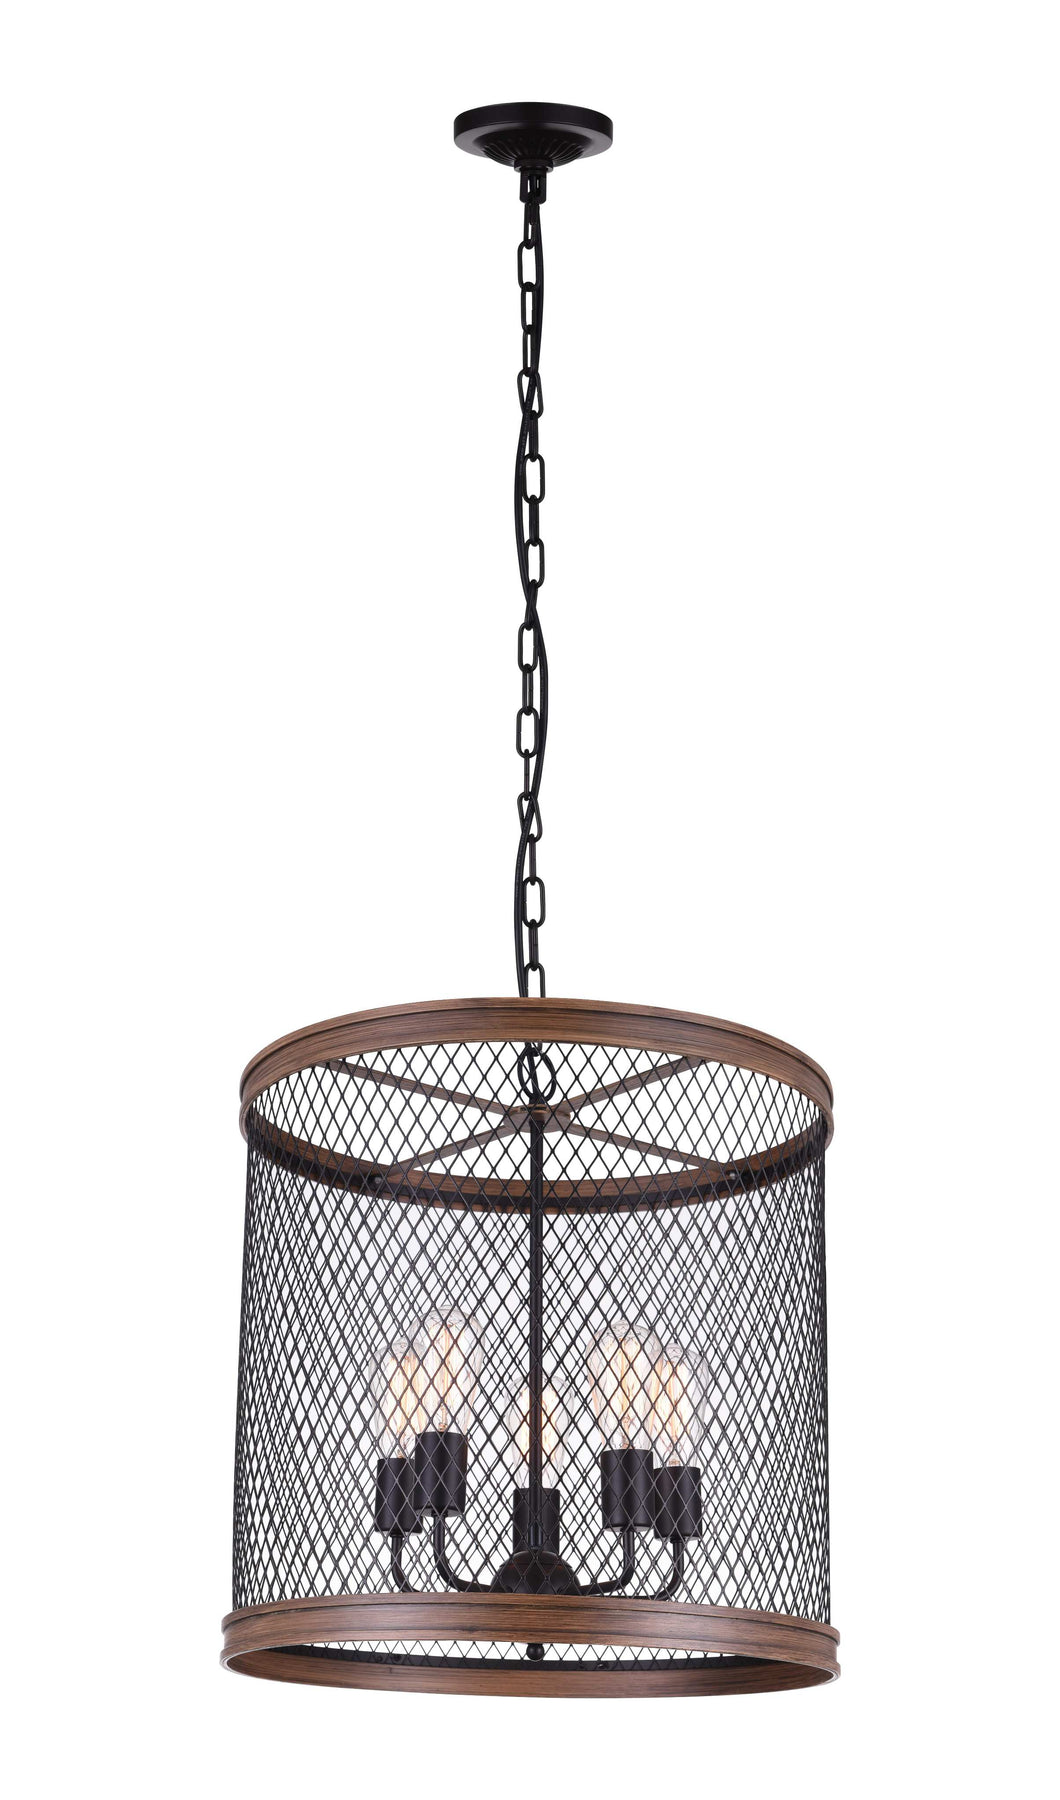 5 Light Drum Shade Chandelier with Black finish